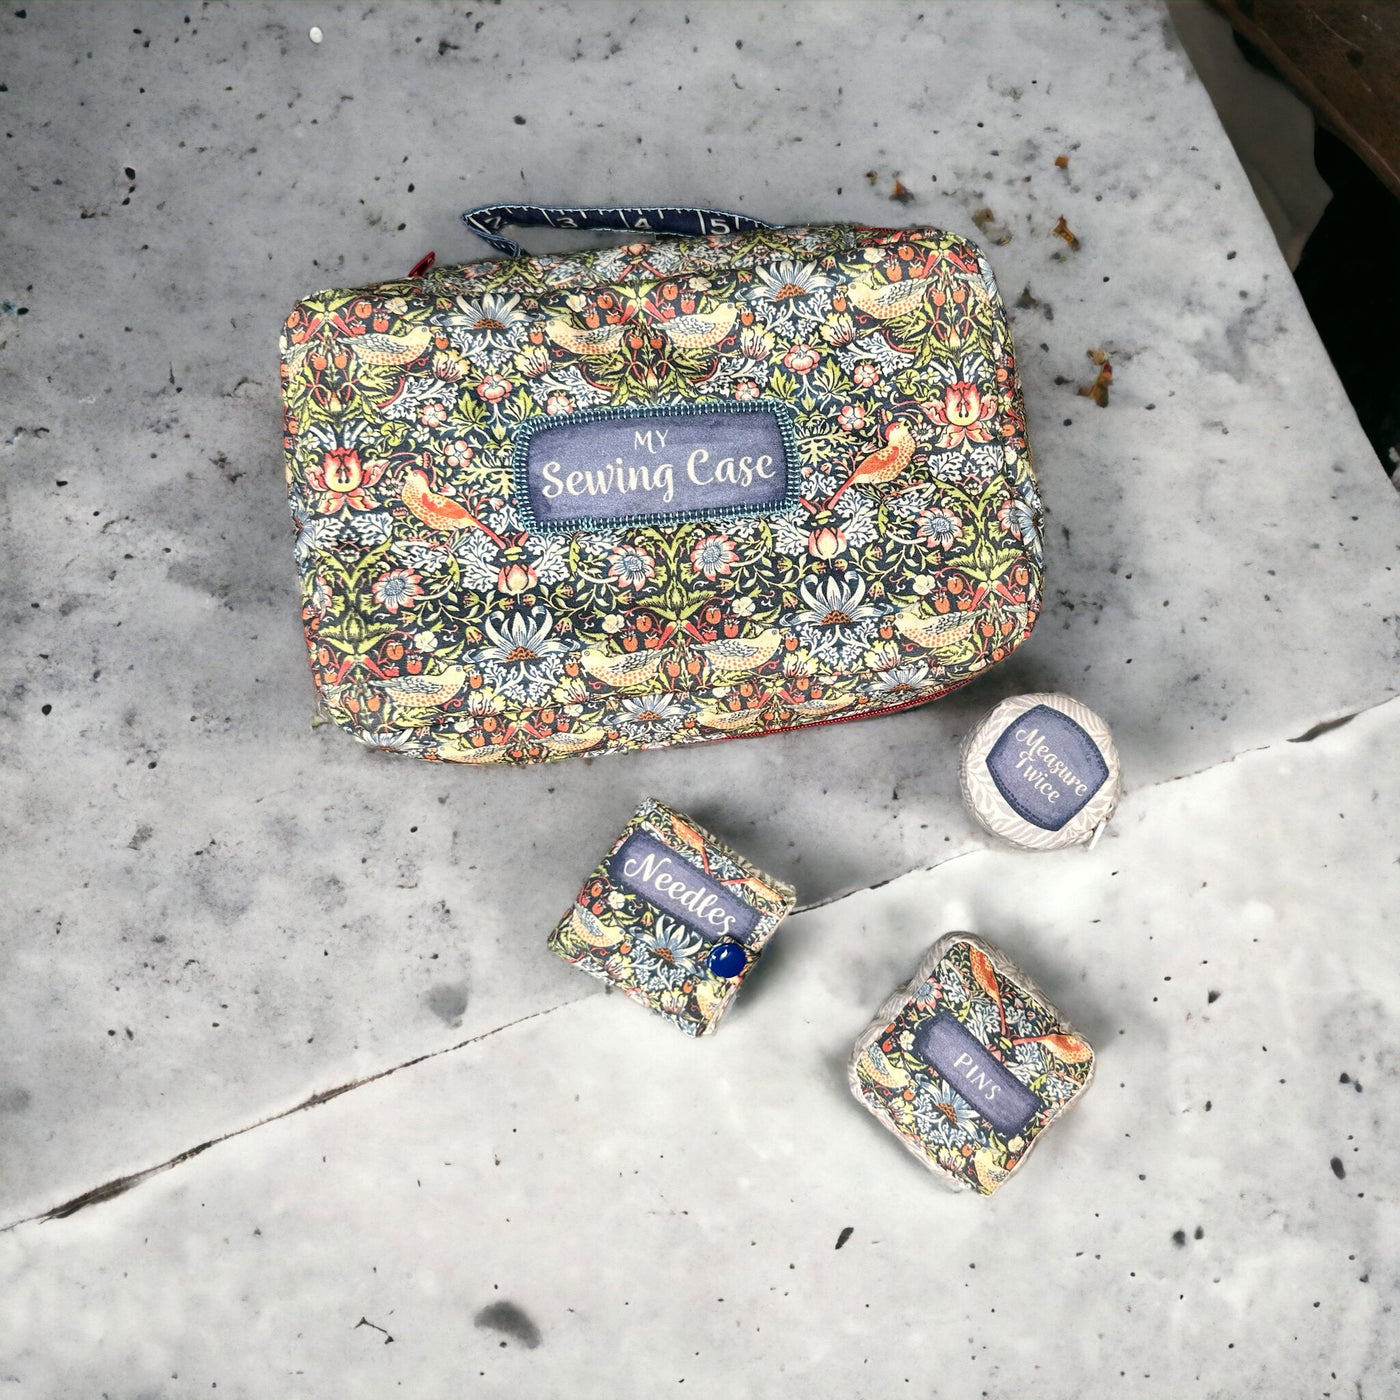 The Sewing Case – Morris Makes Kit